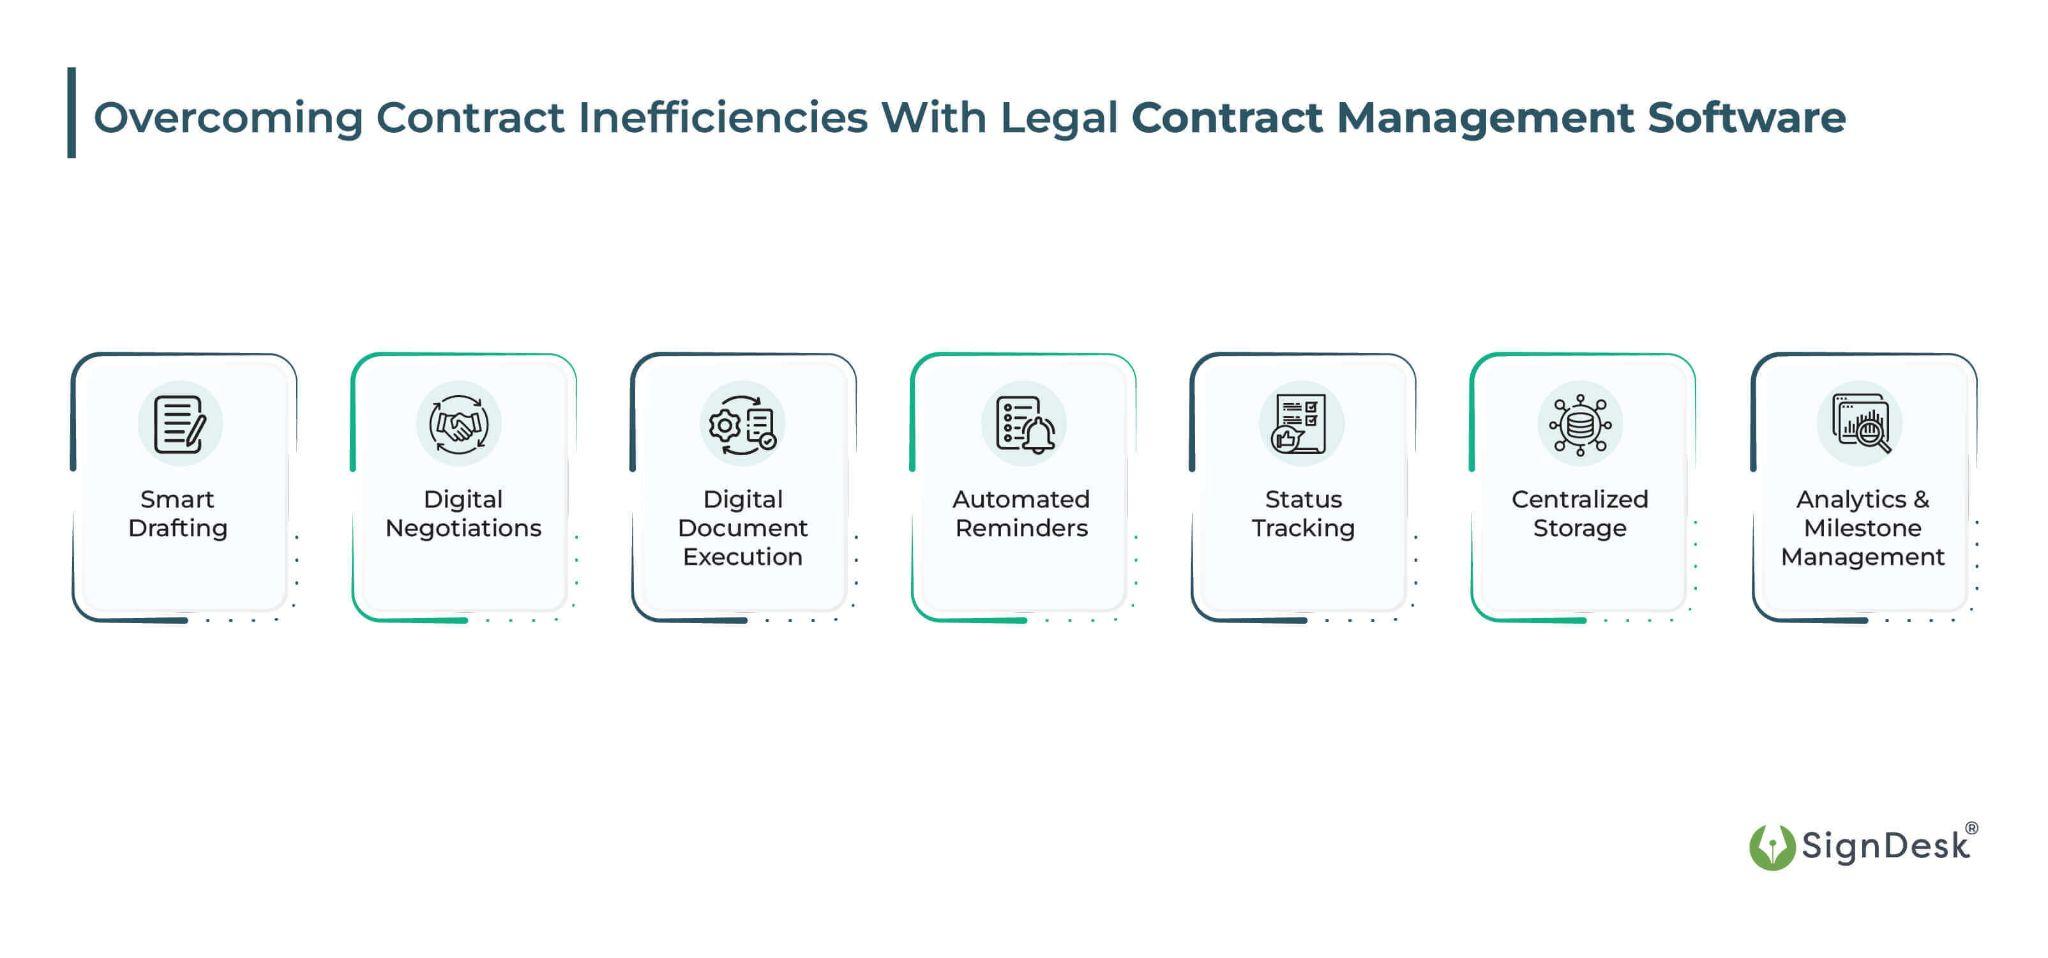 Overcoming Contract Inefficiencies With Legal Contract Management Software